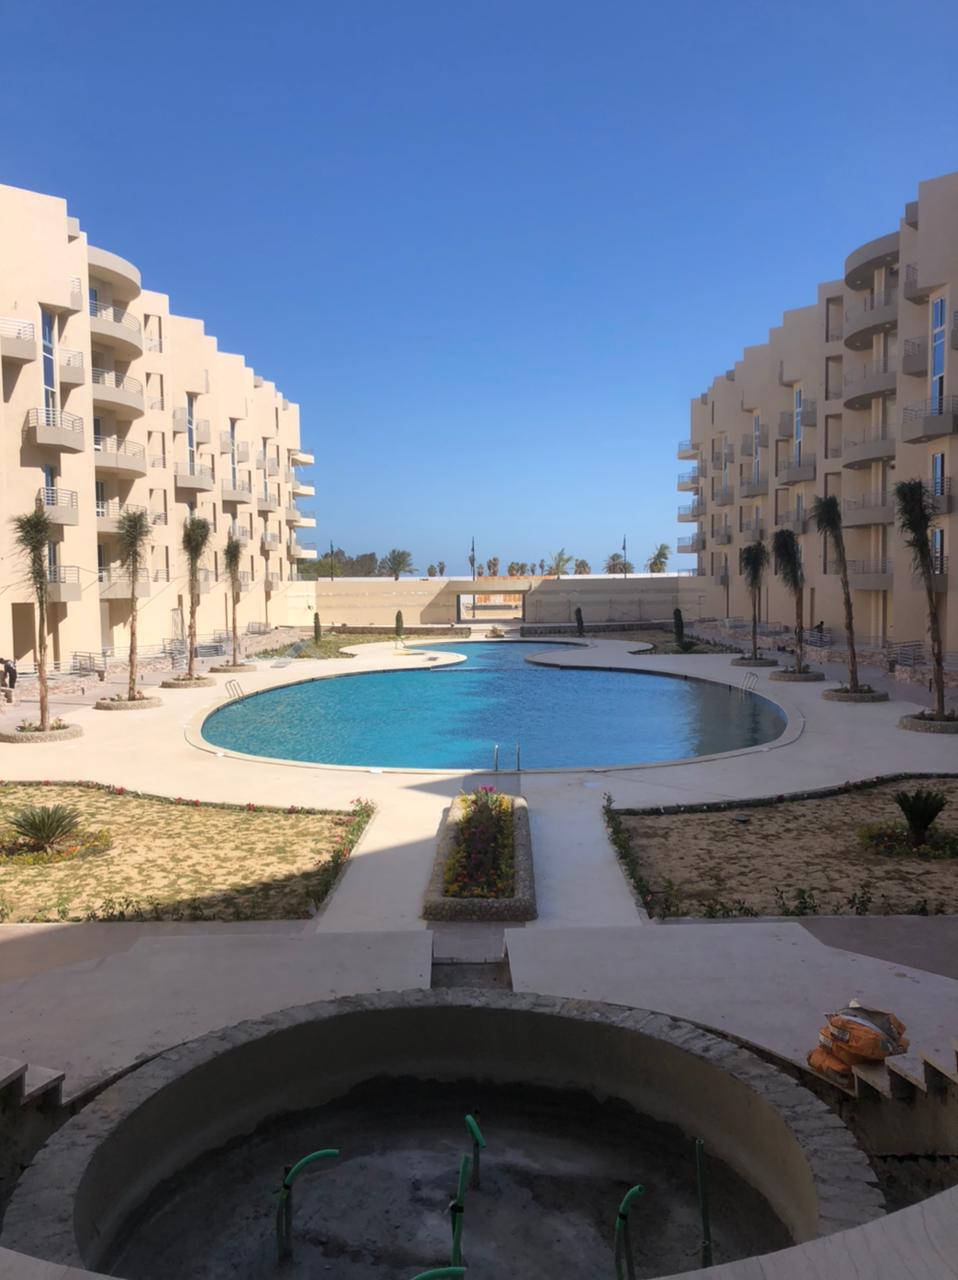 Apartment with a pool and one bedroom the Princ